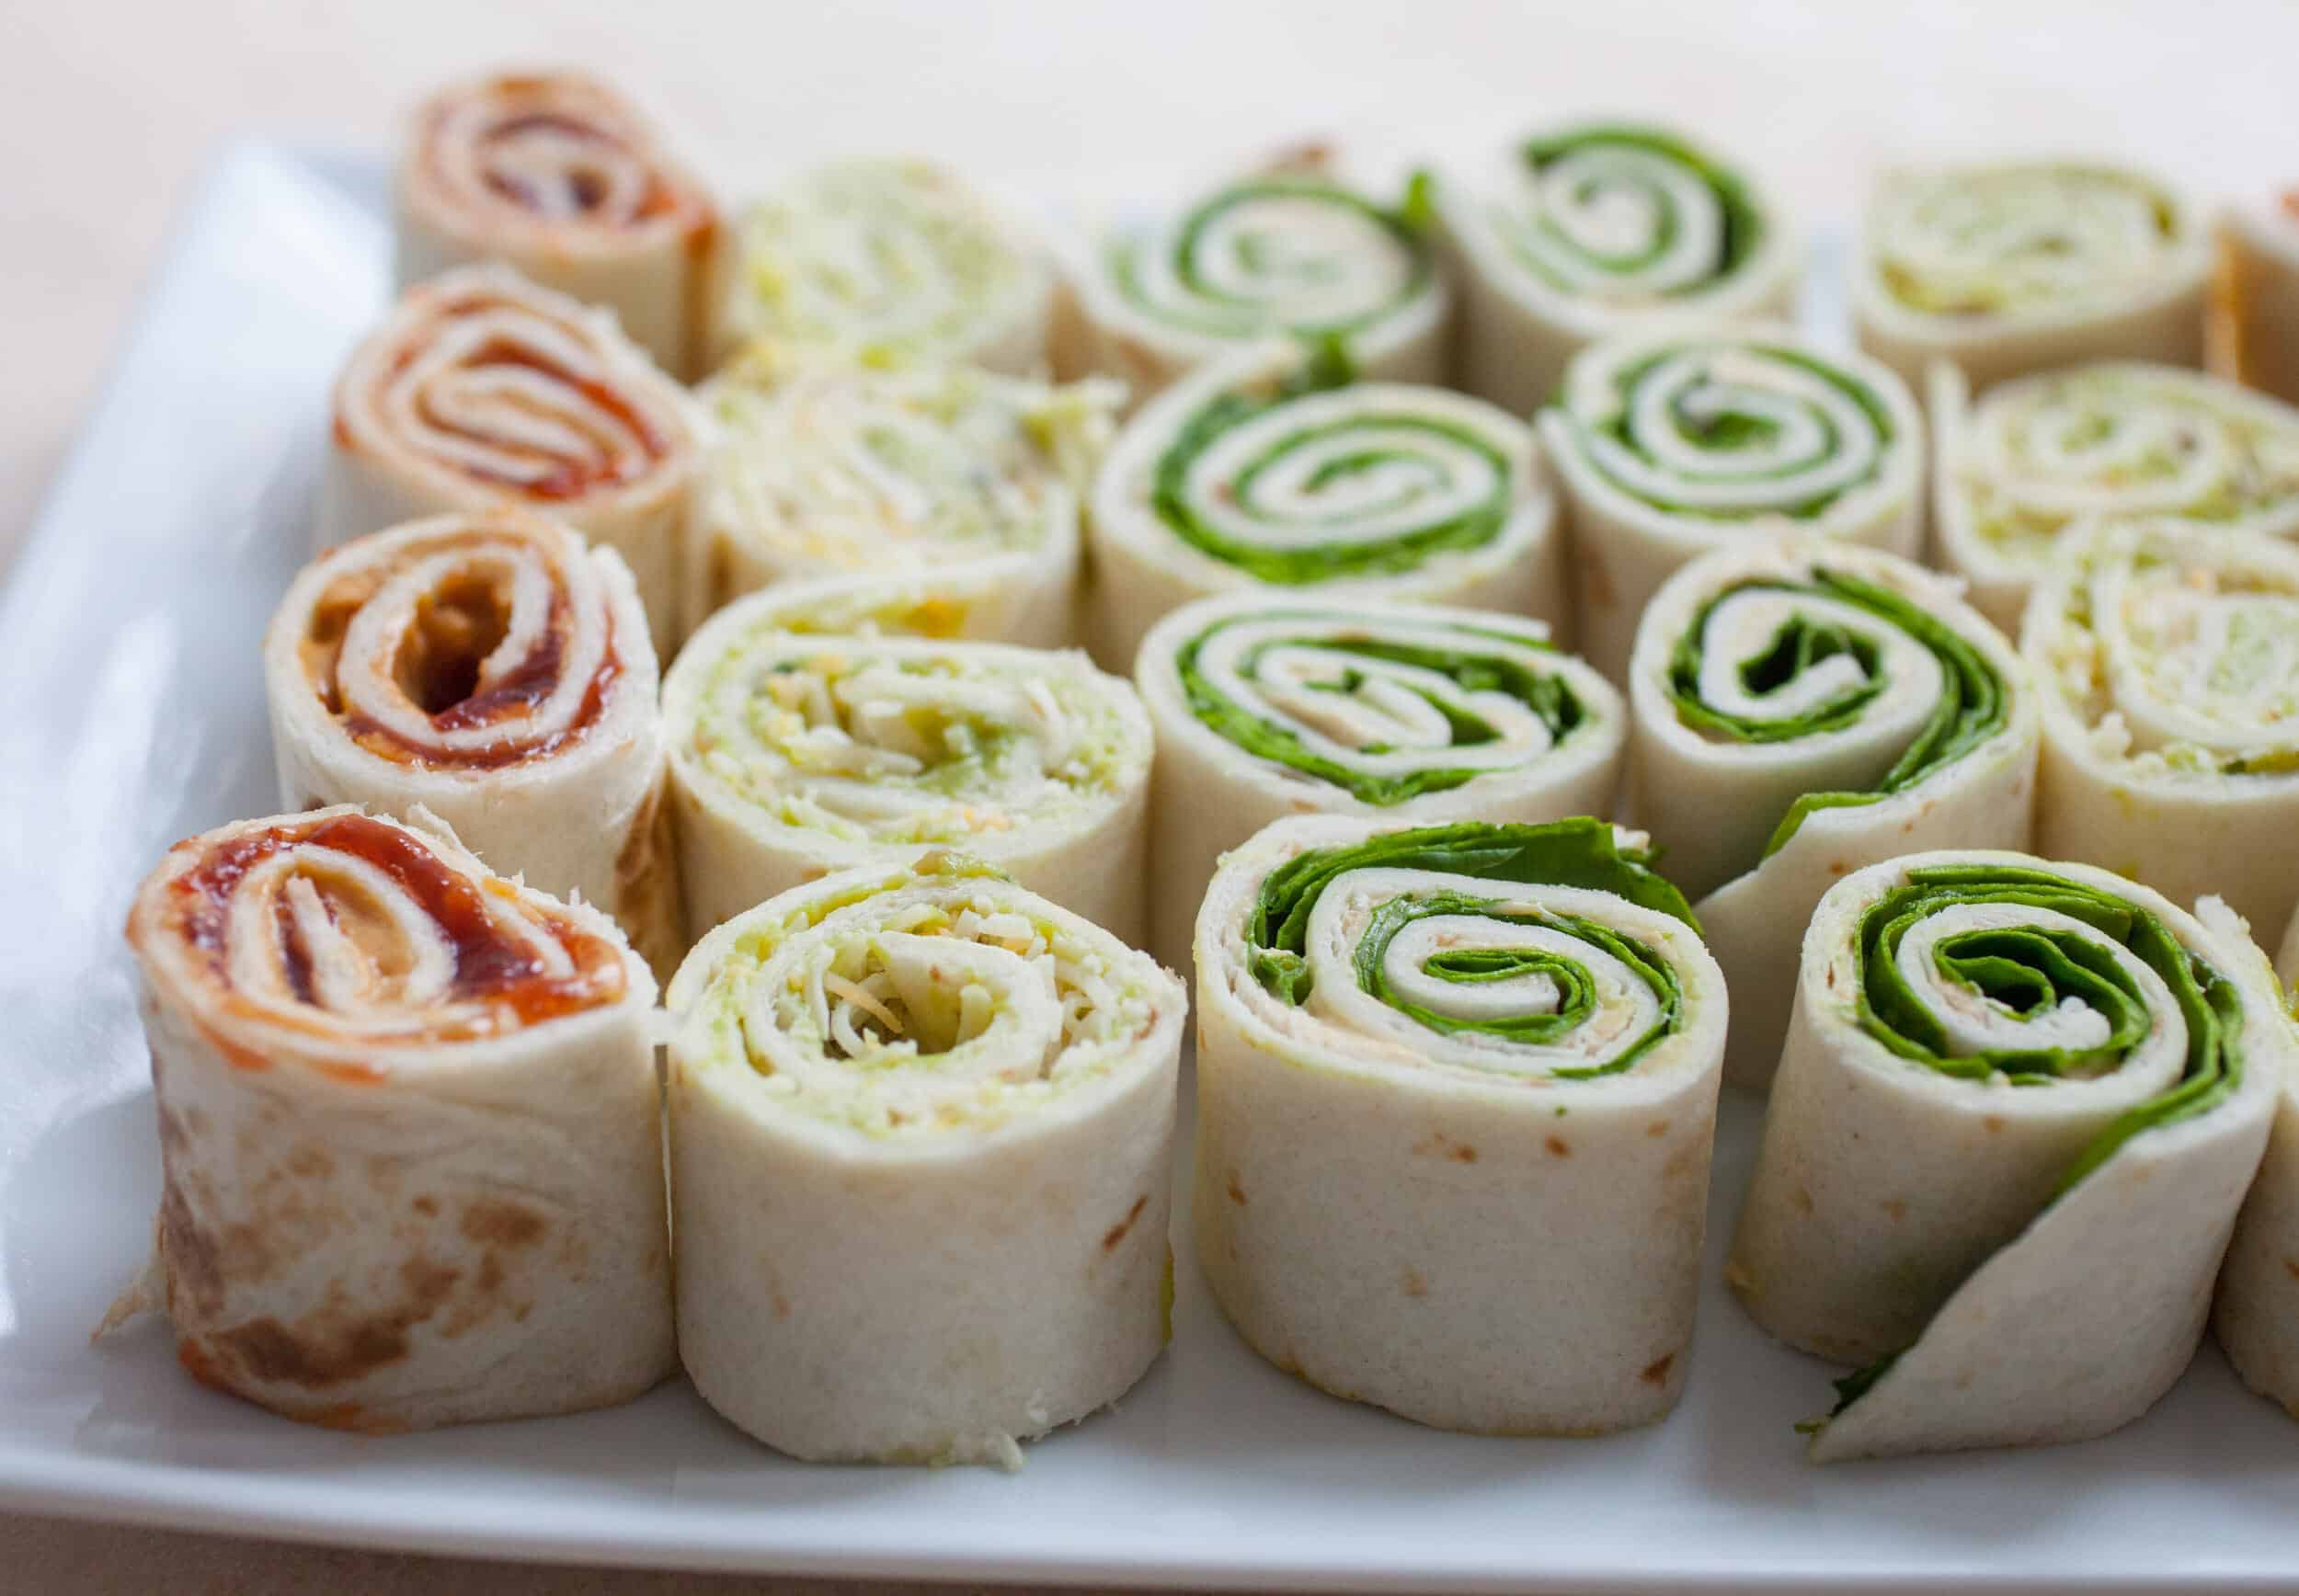 Three Easy Pinwheels: Getting snacks ready for hungry kids can always be a bit of a obstacle course. I like to keep these quick pinwheels at the ready for easy snacks! | macheesmo.com